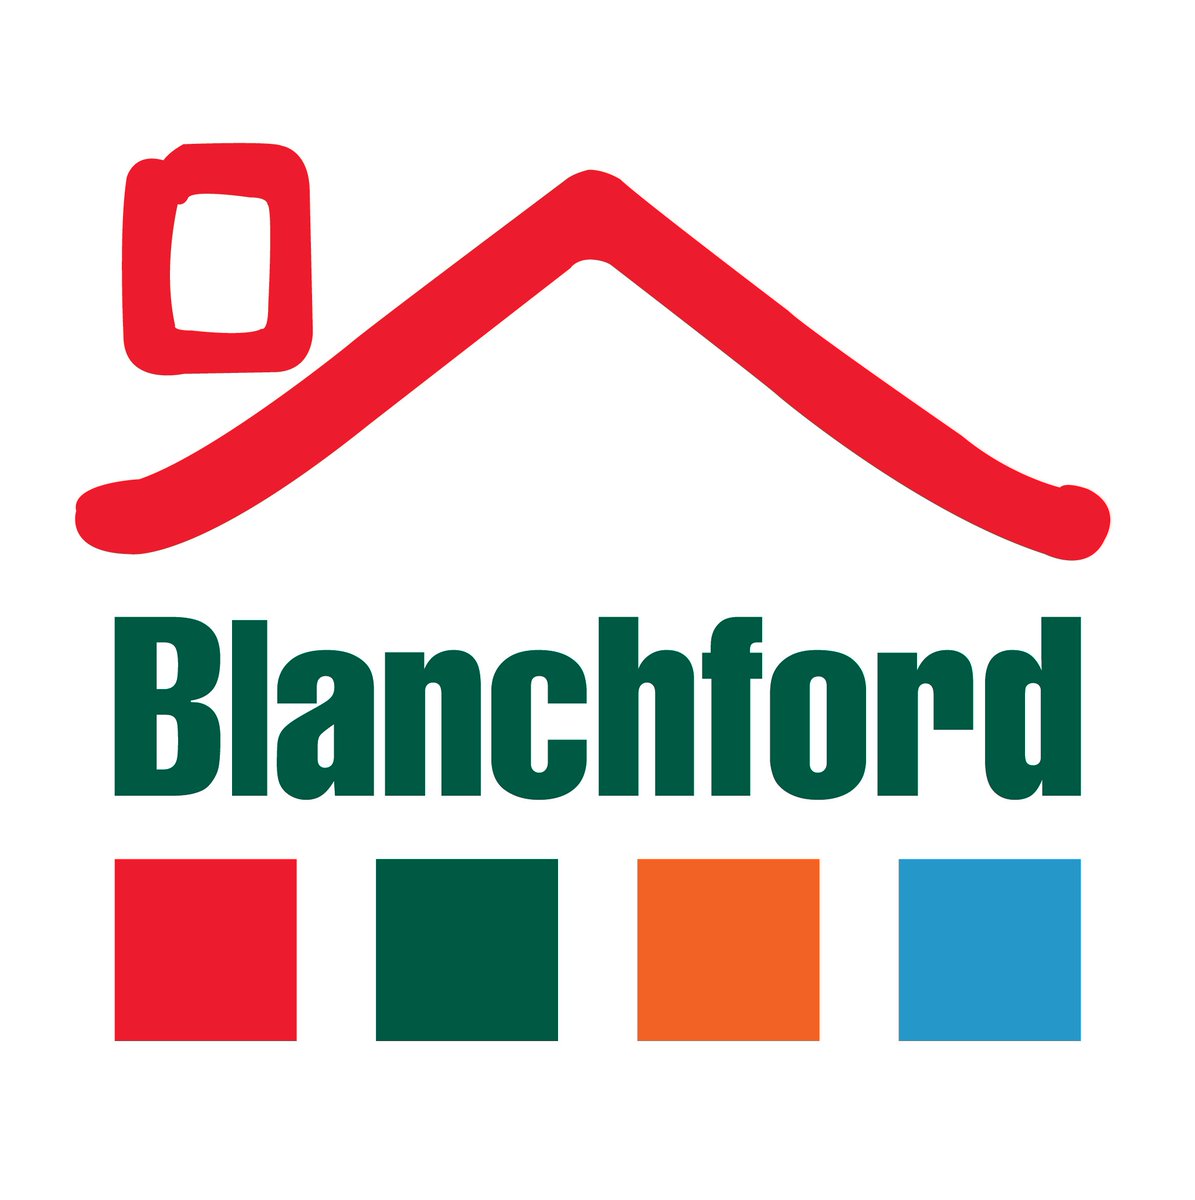 Blanchford and co